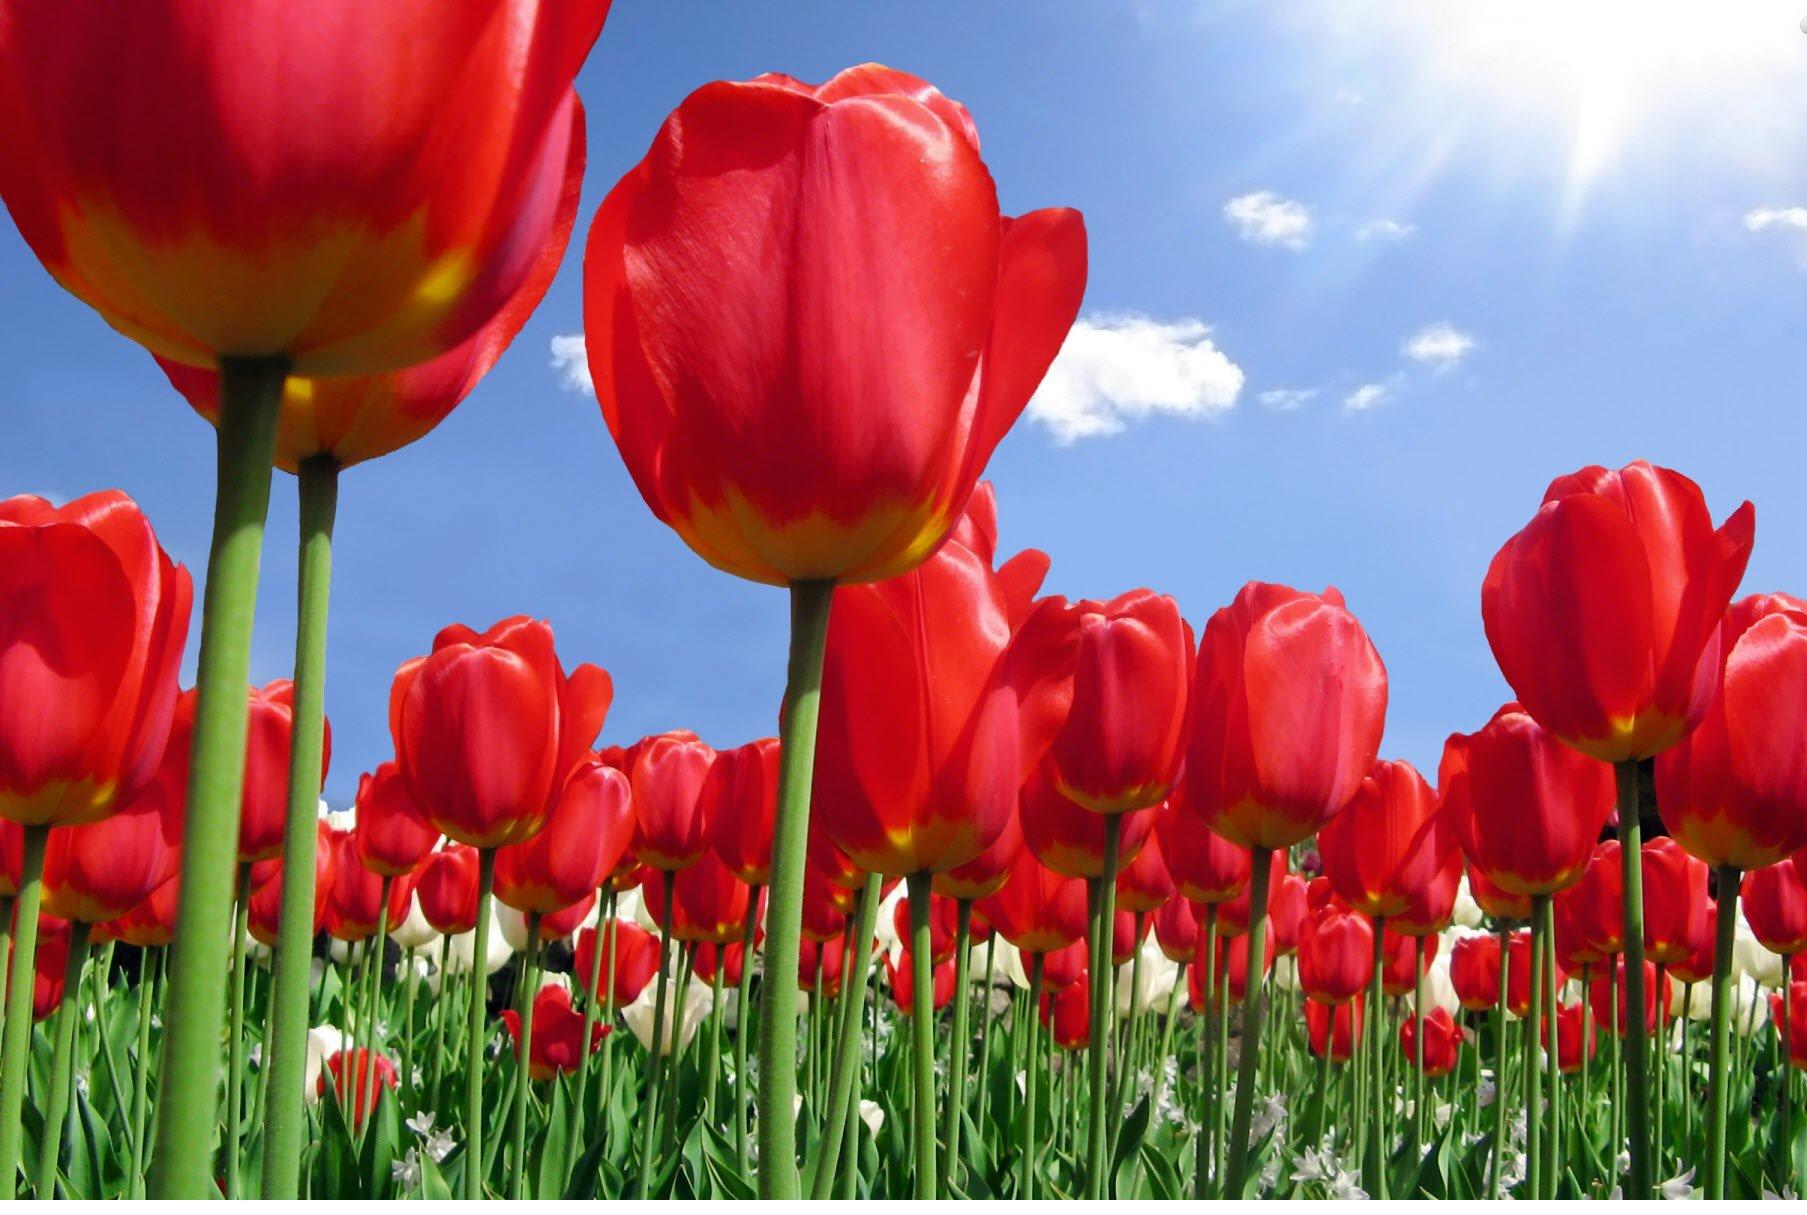 Back To Red Tulips High Definition Wallpaper Background Next Image